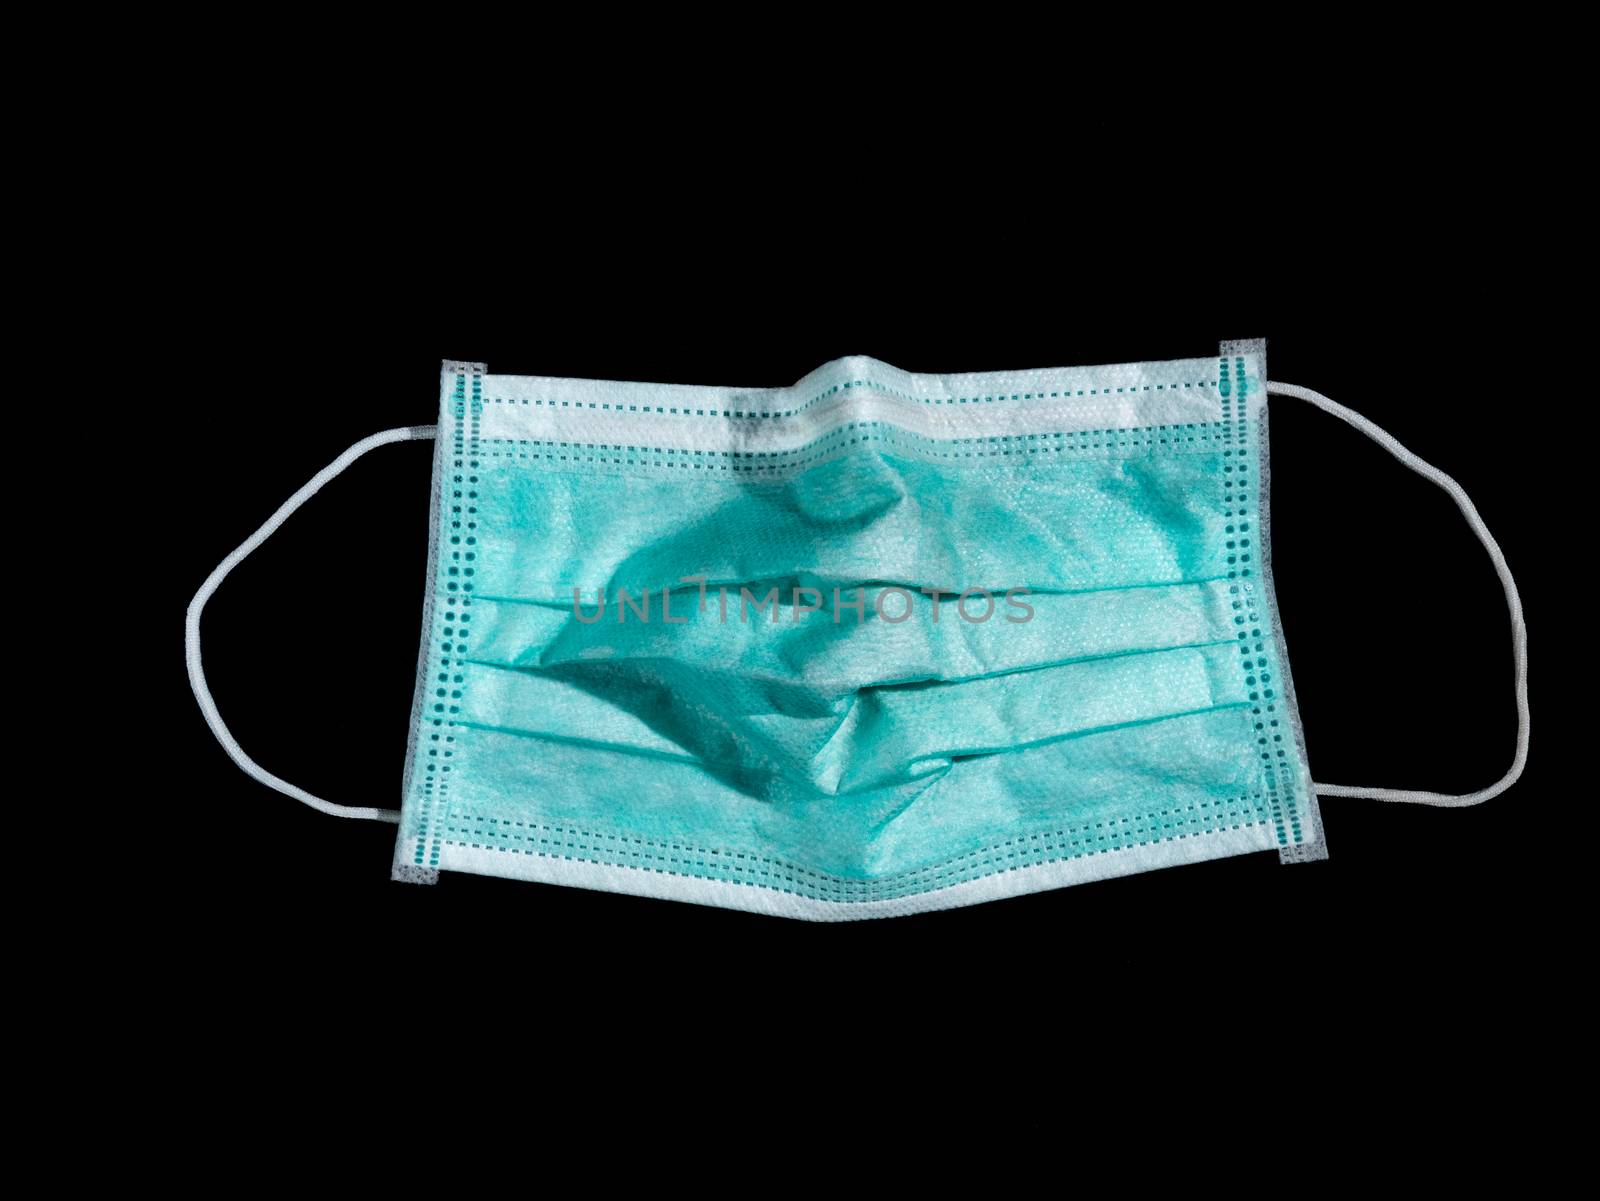 Used surgical mask place on black background, discarded mask concept. Dark tone.